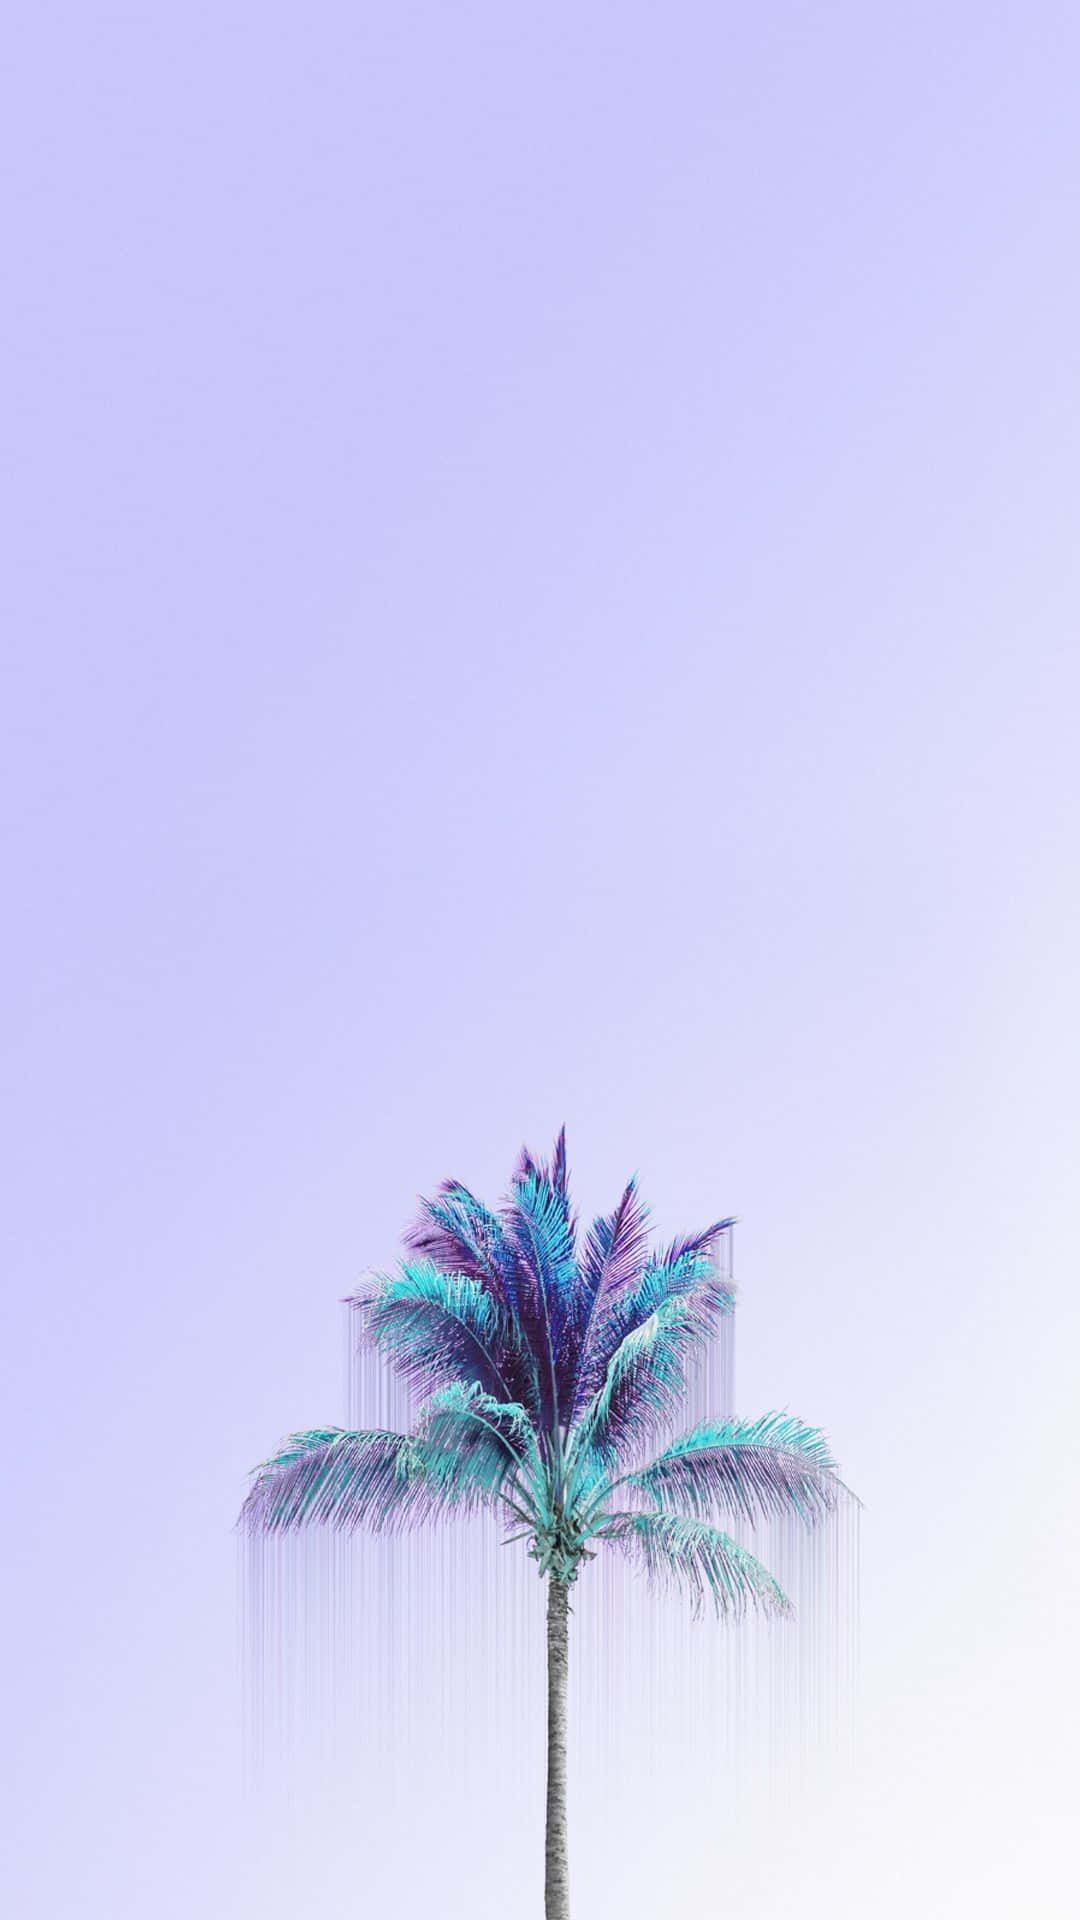 A Palm Tree In A Blue And Purple Background Wallpaper